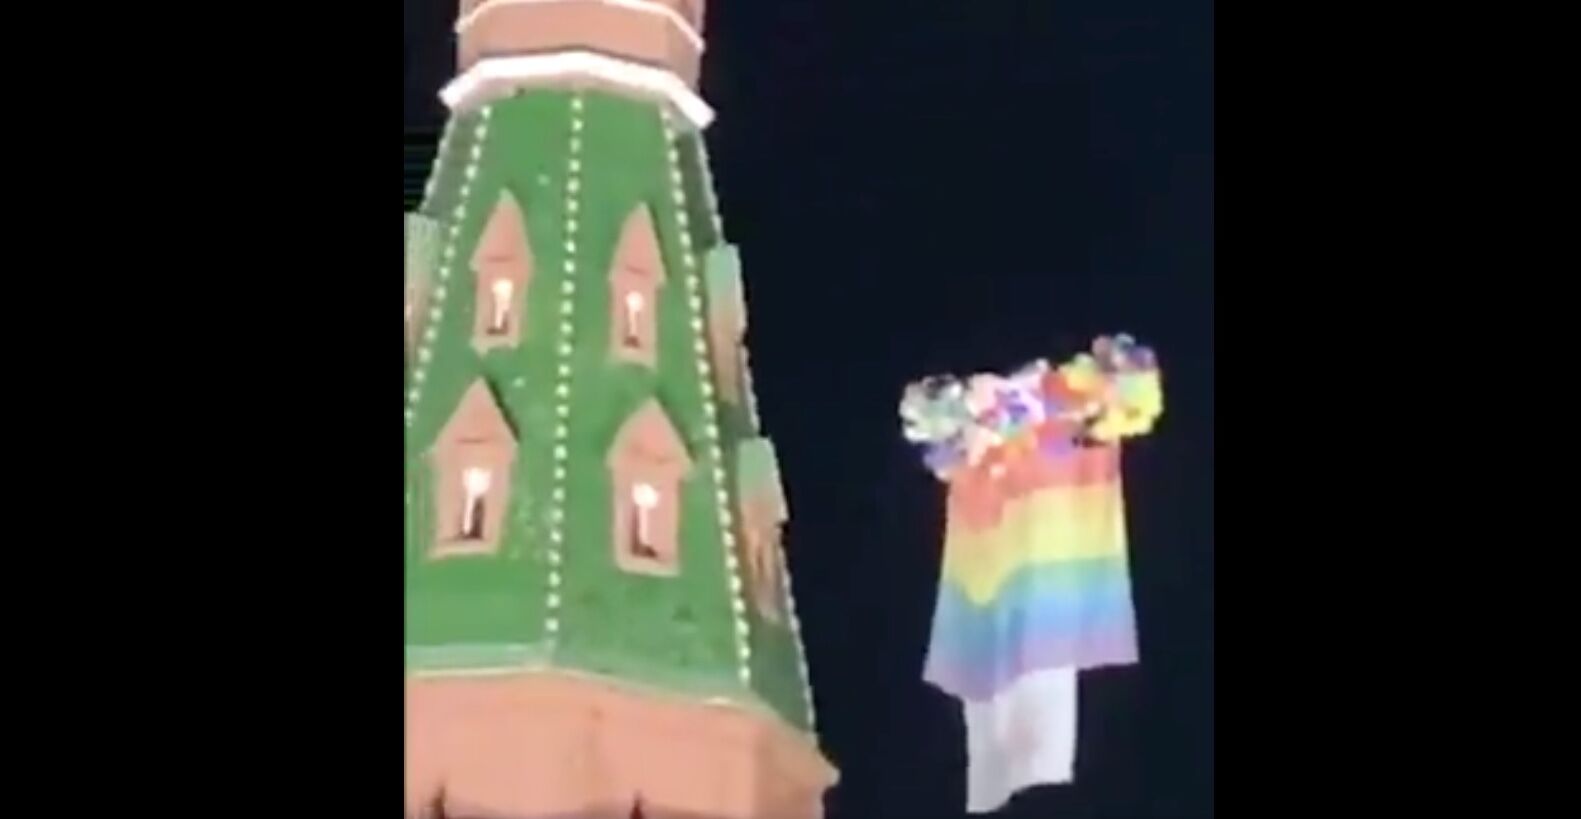 Alexander Donskoy flew a pride flag over the Kremlin using rainbow-colored balloons